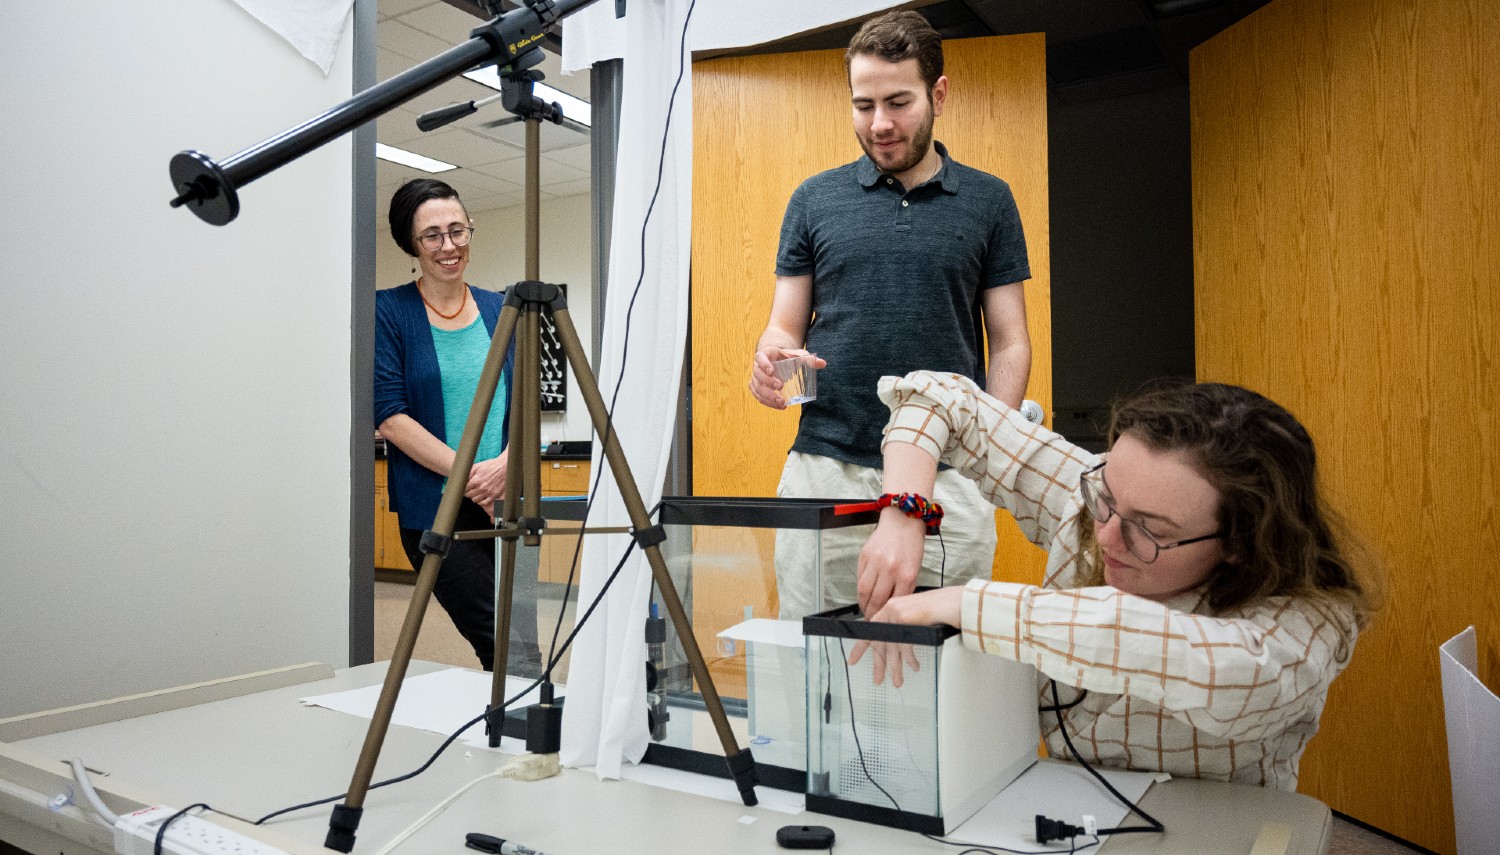 Leah Wilson, assistant professor of neuroscience, oversees research conducted by students April Nussbaum and Jacob Krawitz.